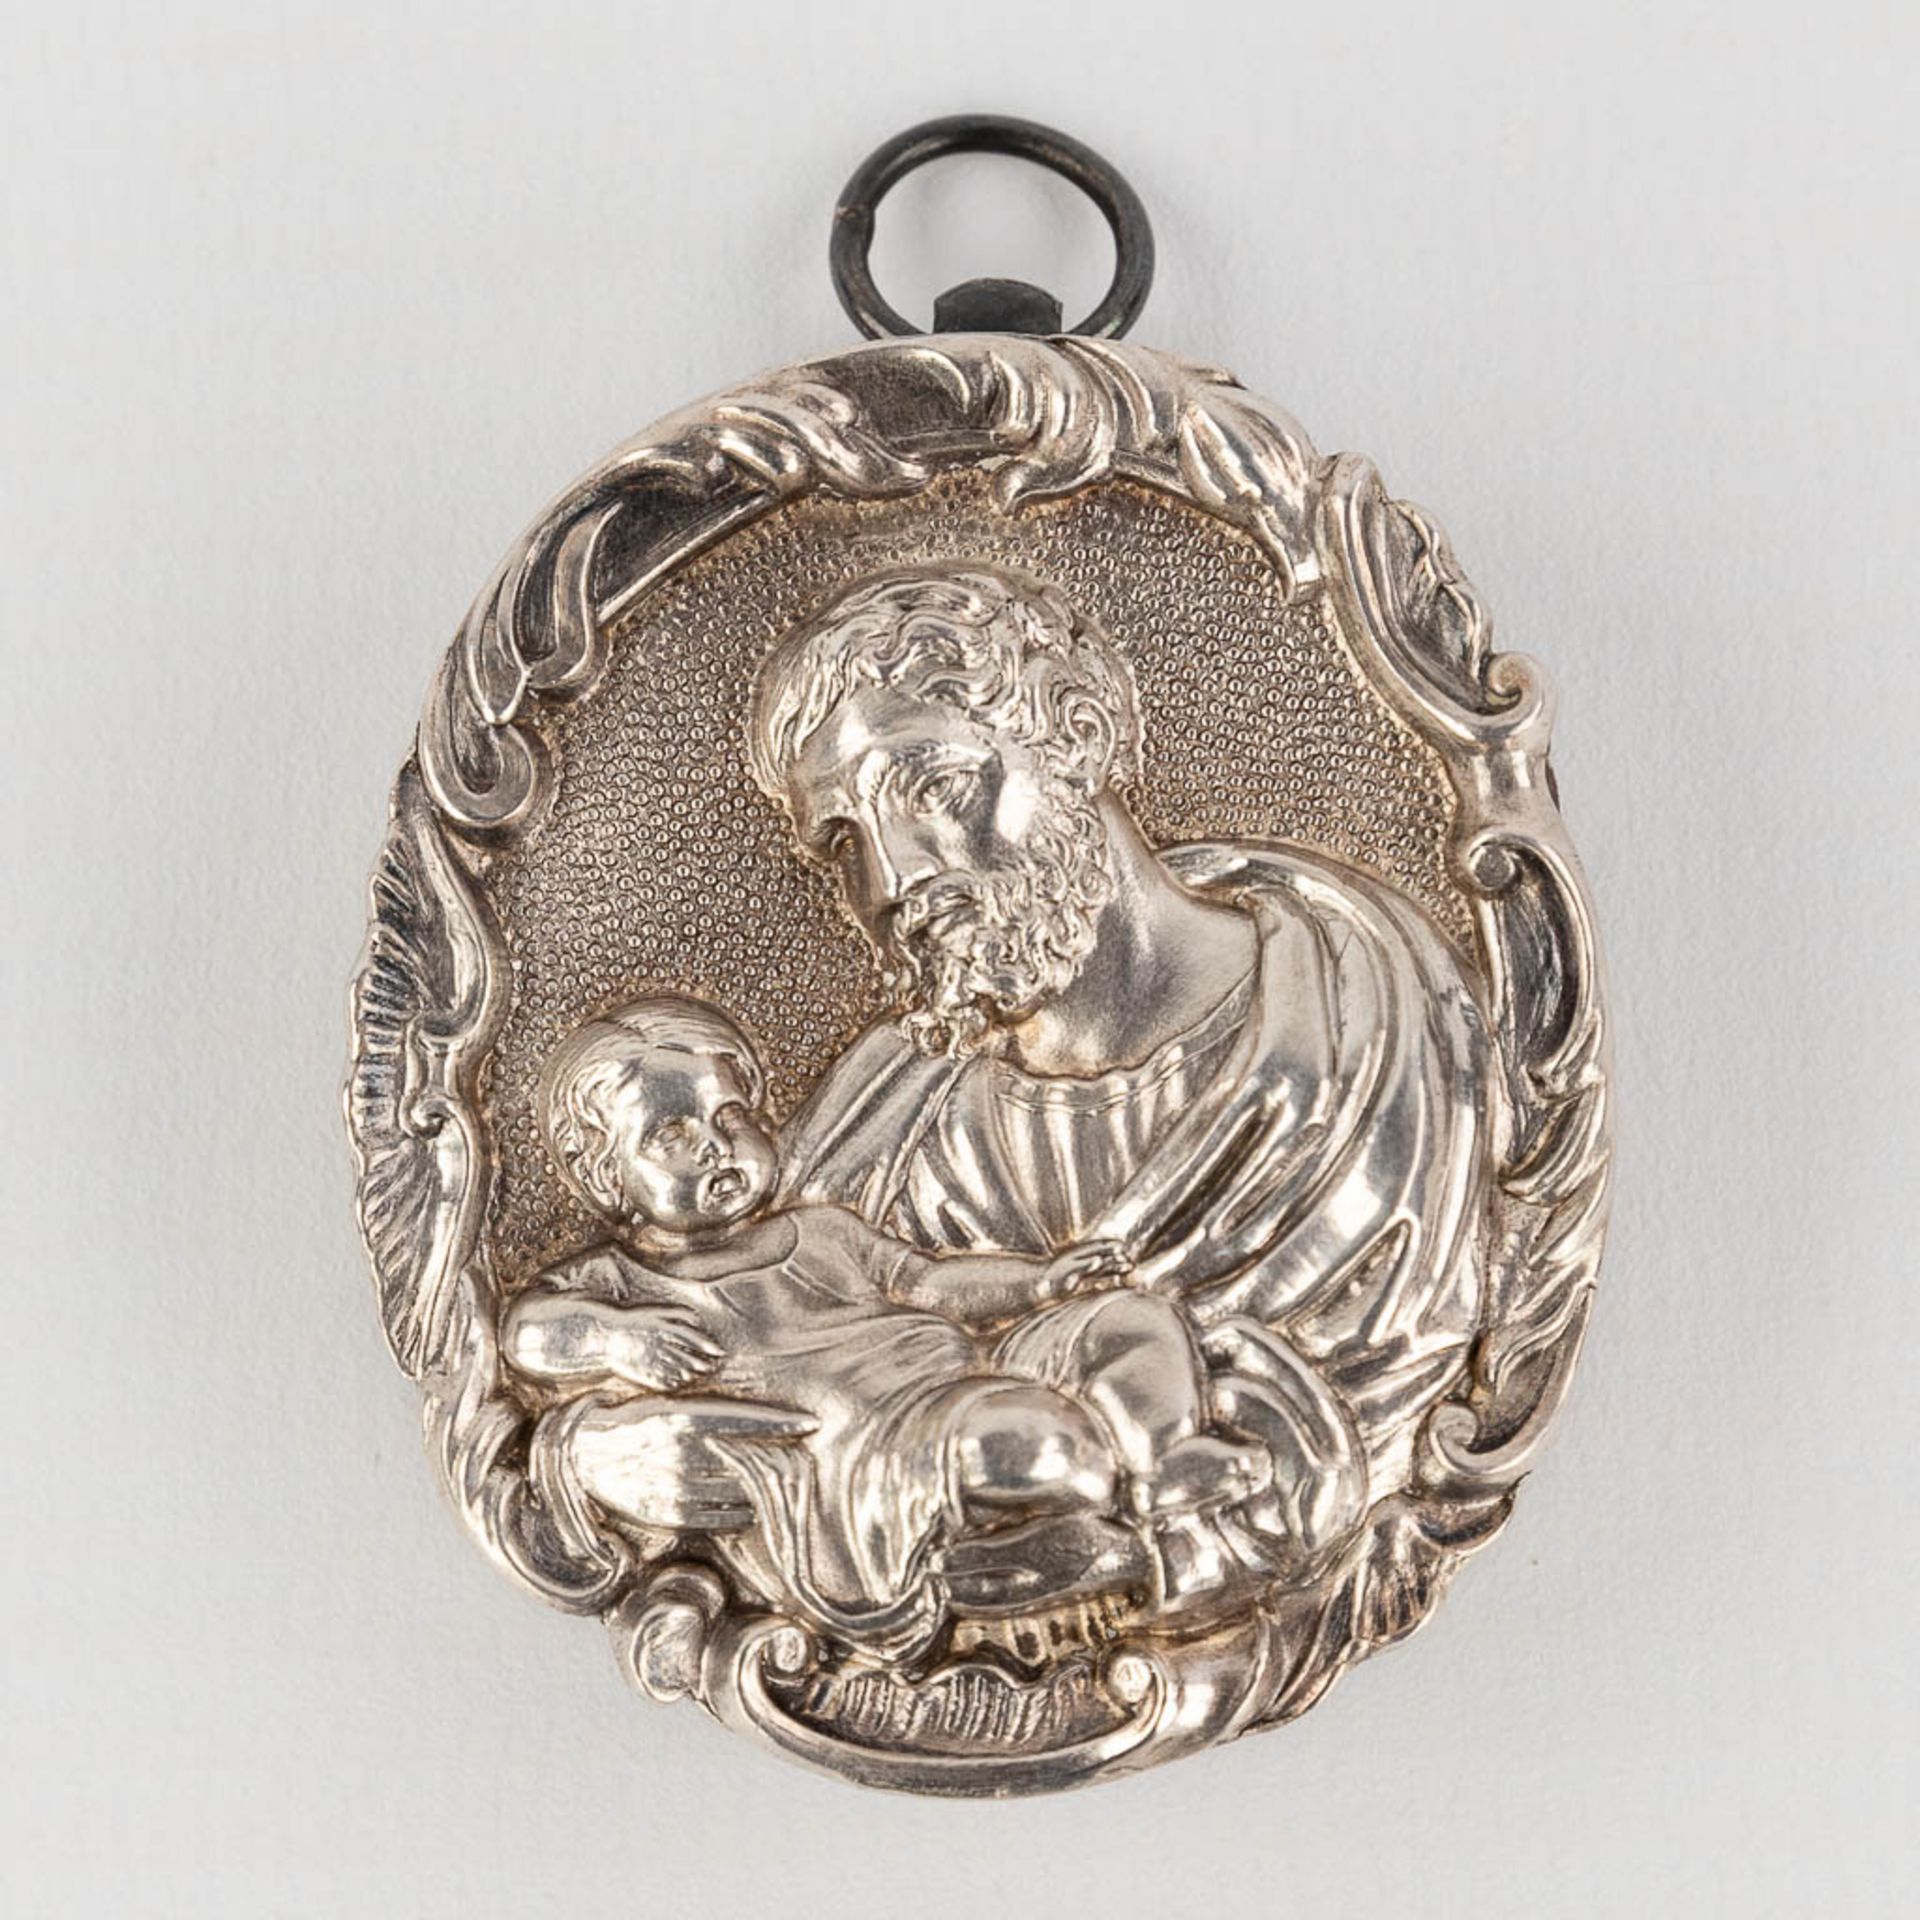 A set of 5 relics in a silver theca, with a repousse image of Joseph and Jesus. 19th century. (W: 4 - Image 3 of 10